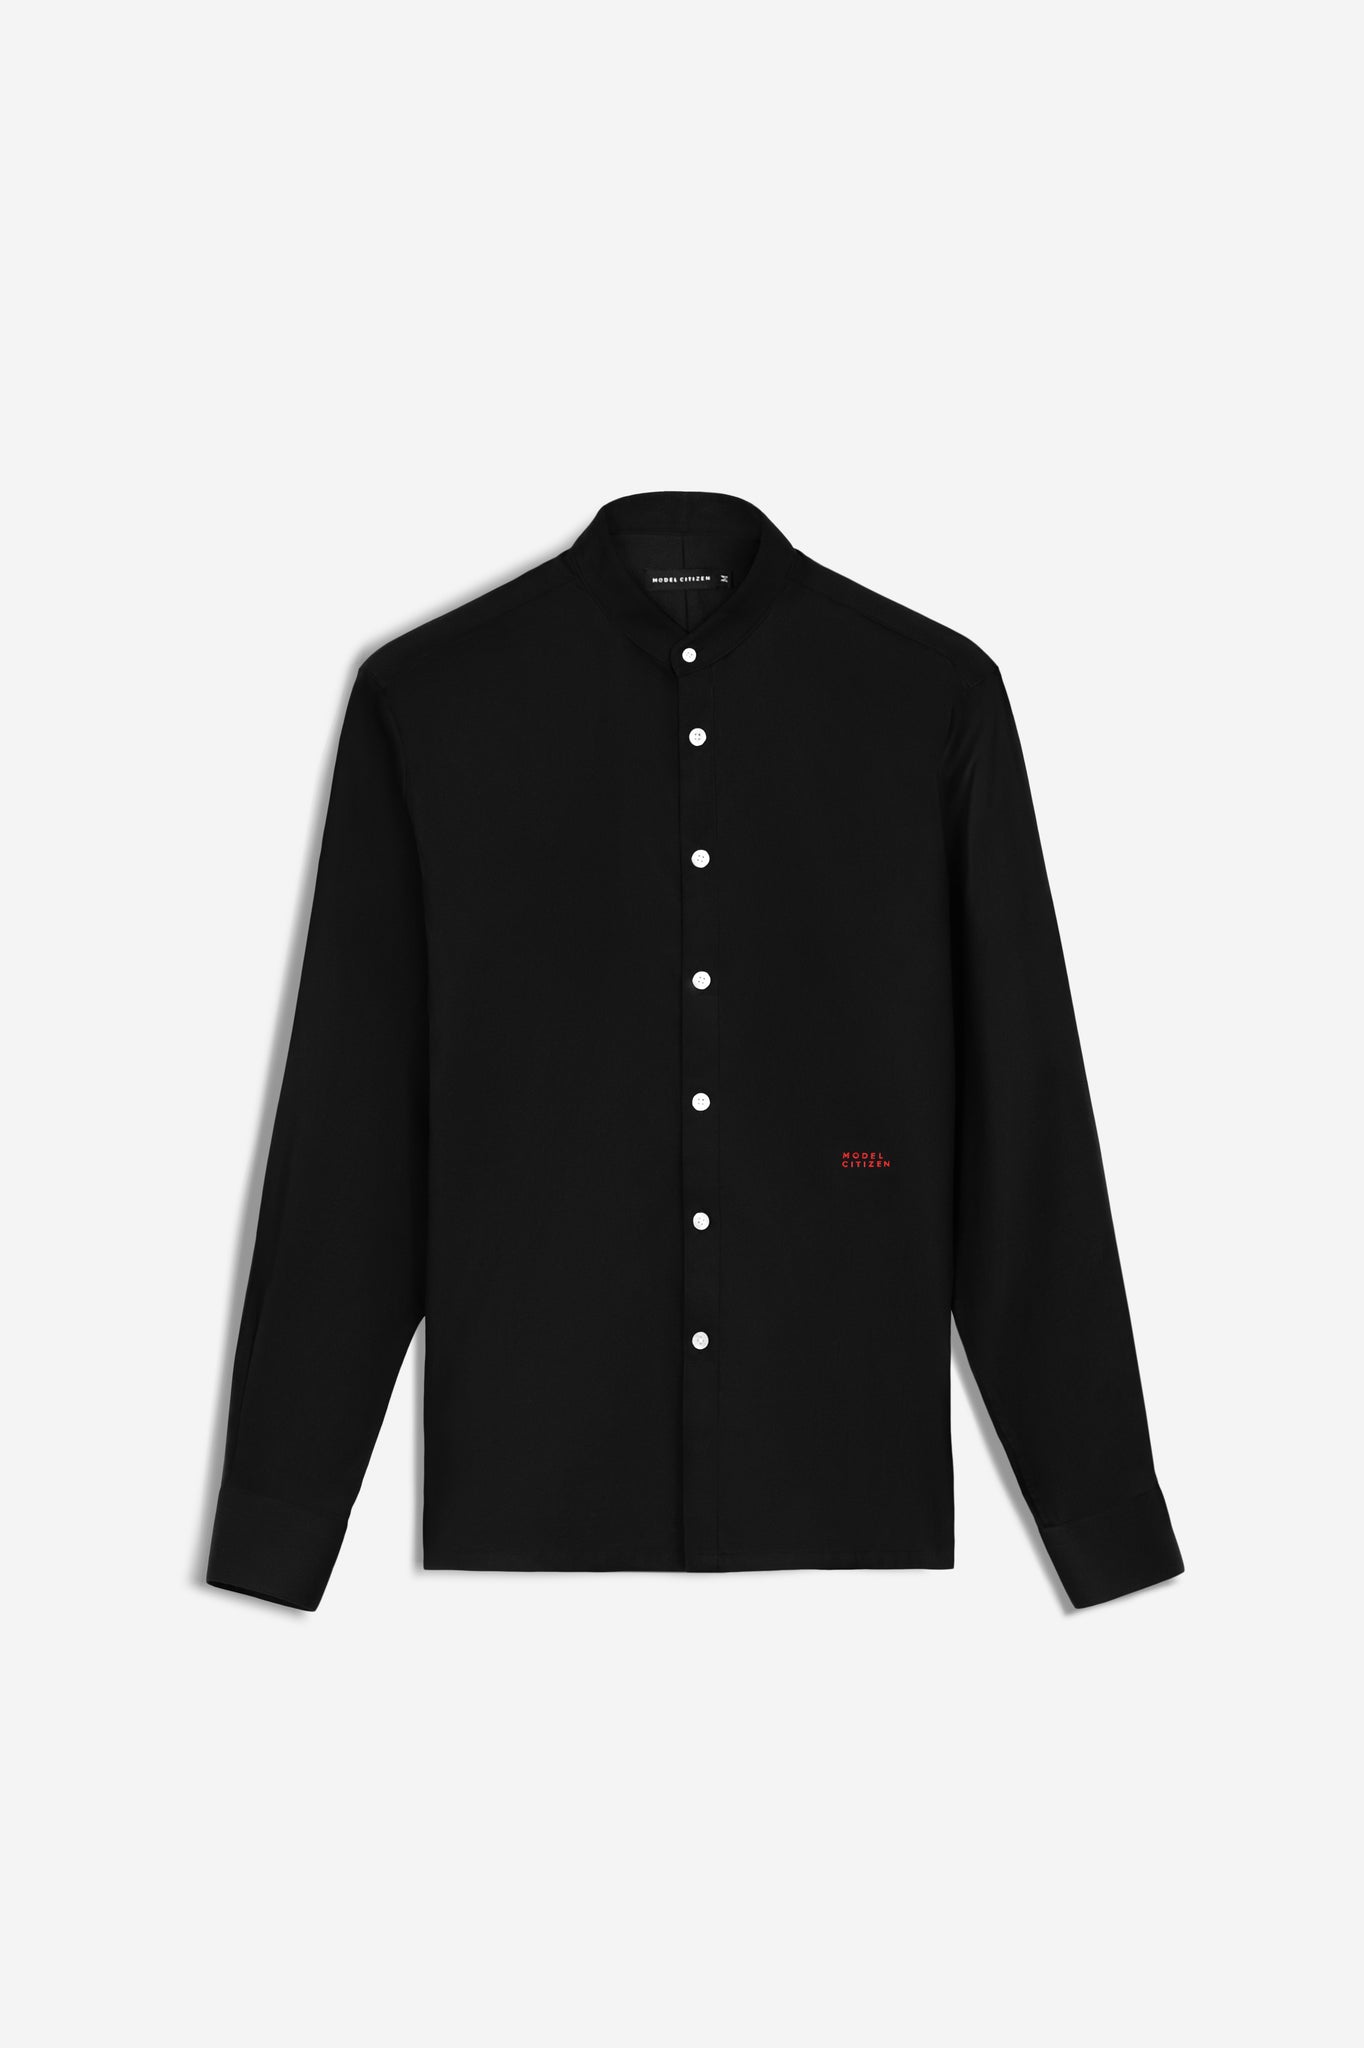 Black Oxford Shirt with embroidery